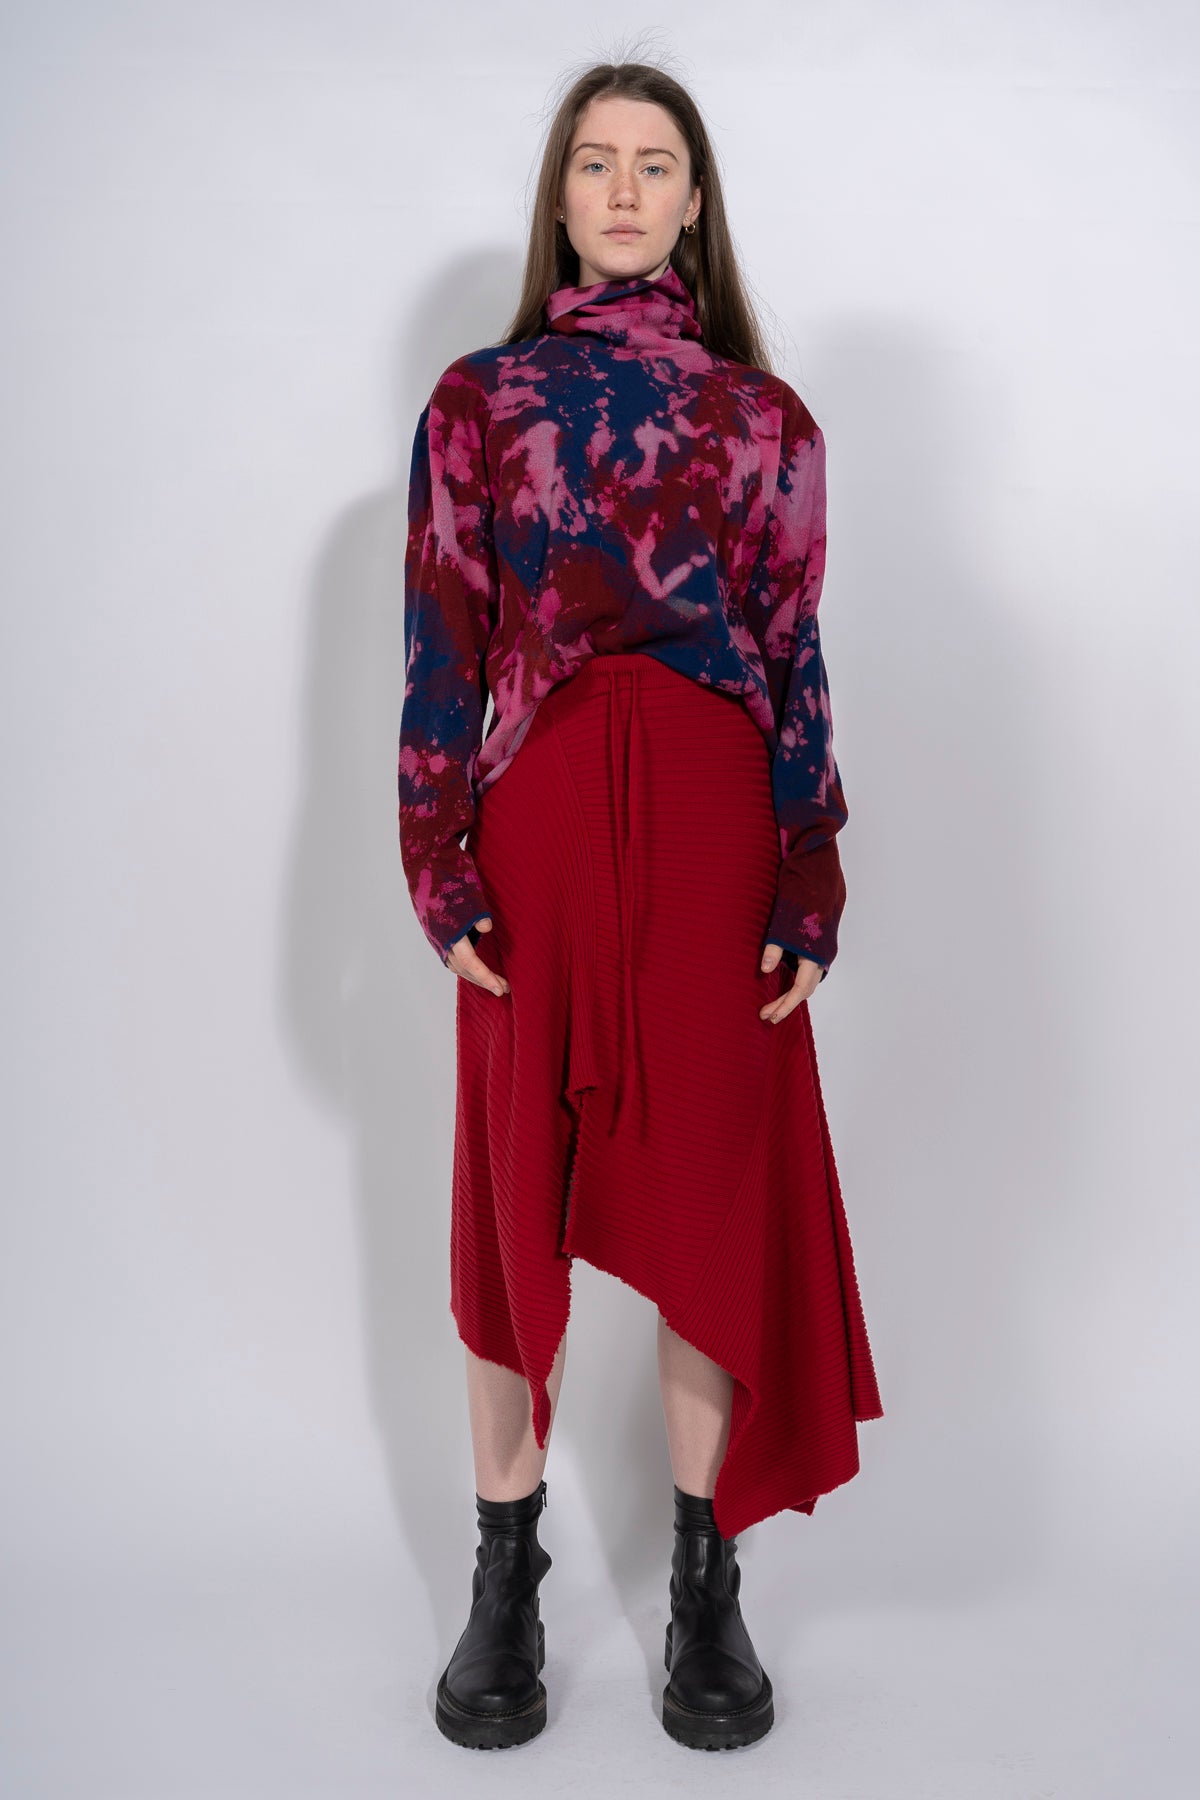 CLASSIC M'A MERINO SKIRT IN RED marques almeida